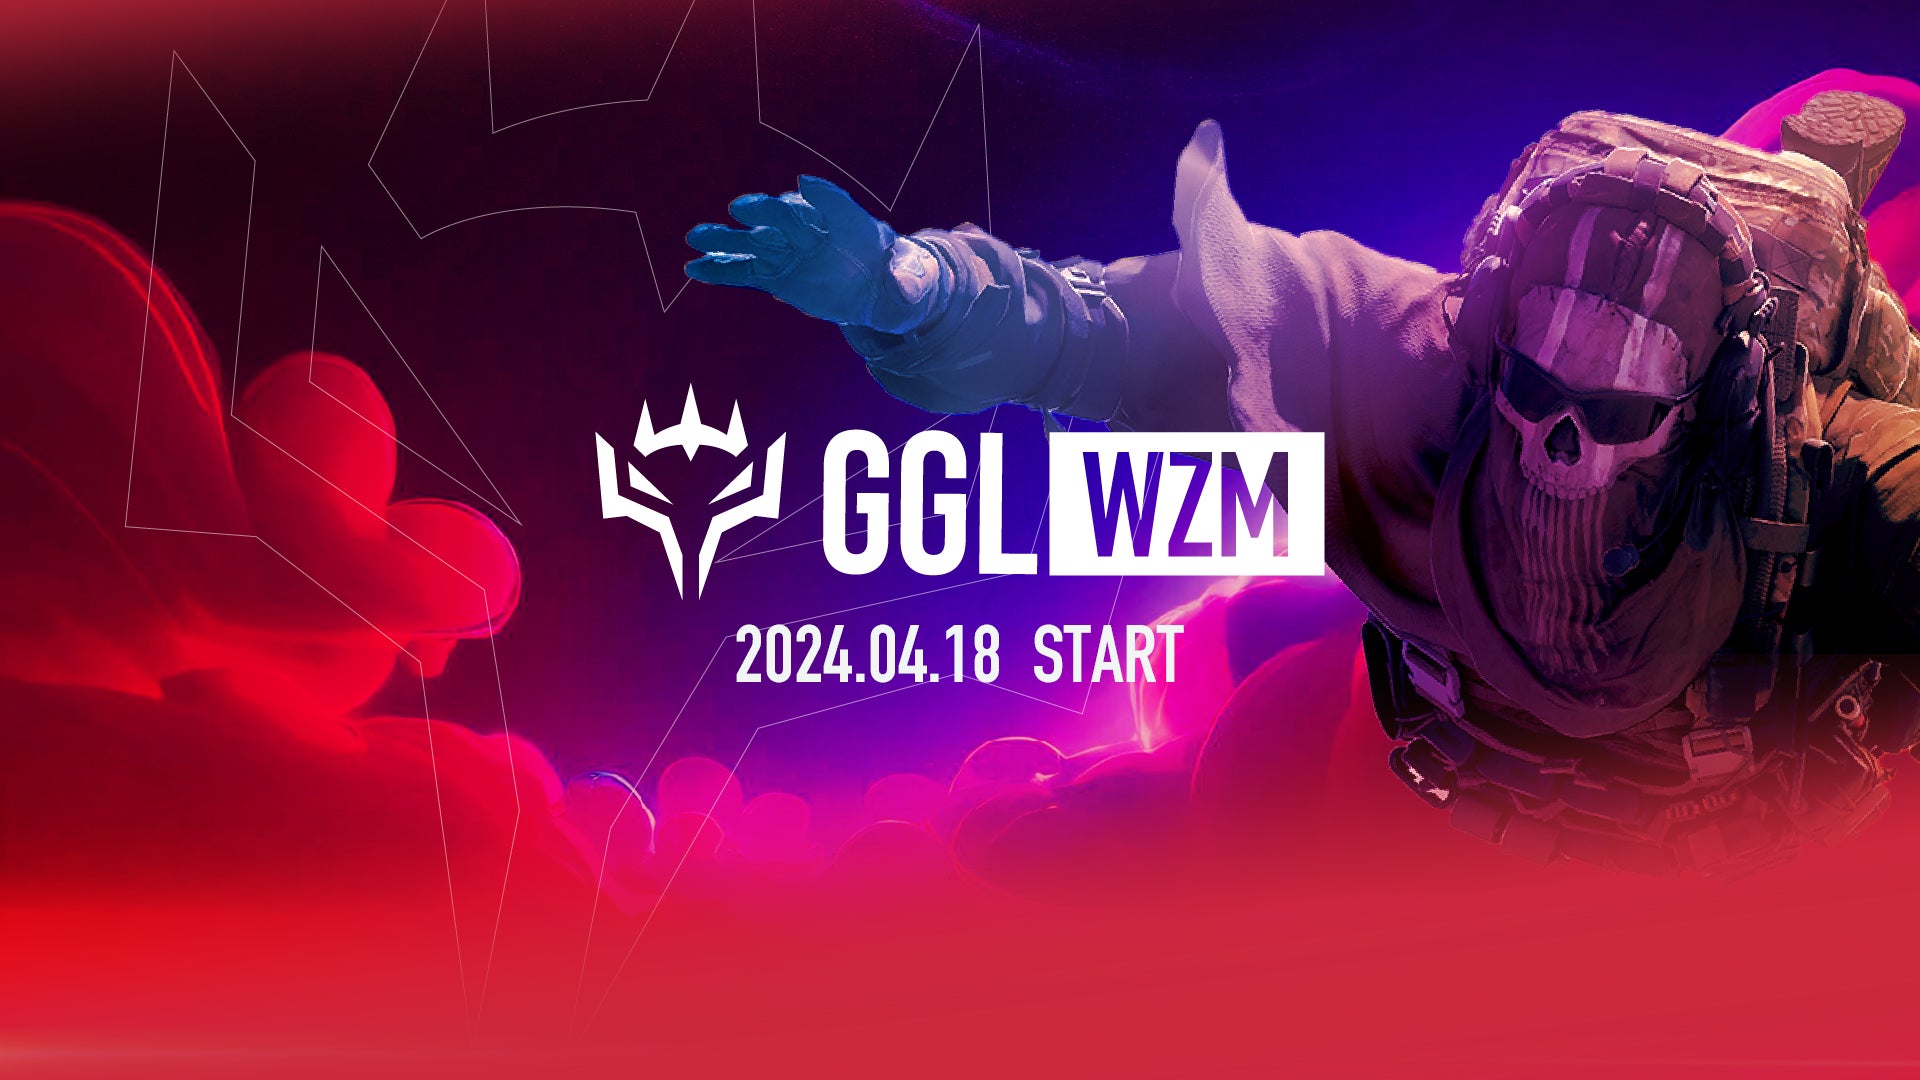 Call of Duty: Warzone Mobileのコミュニティeスポーツ大会「GGL WZM」を4月18日(木)より開催